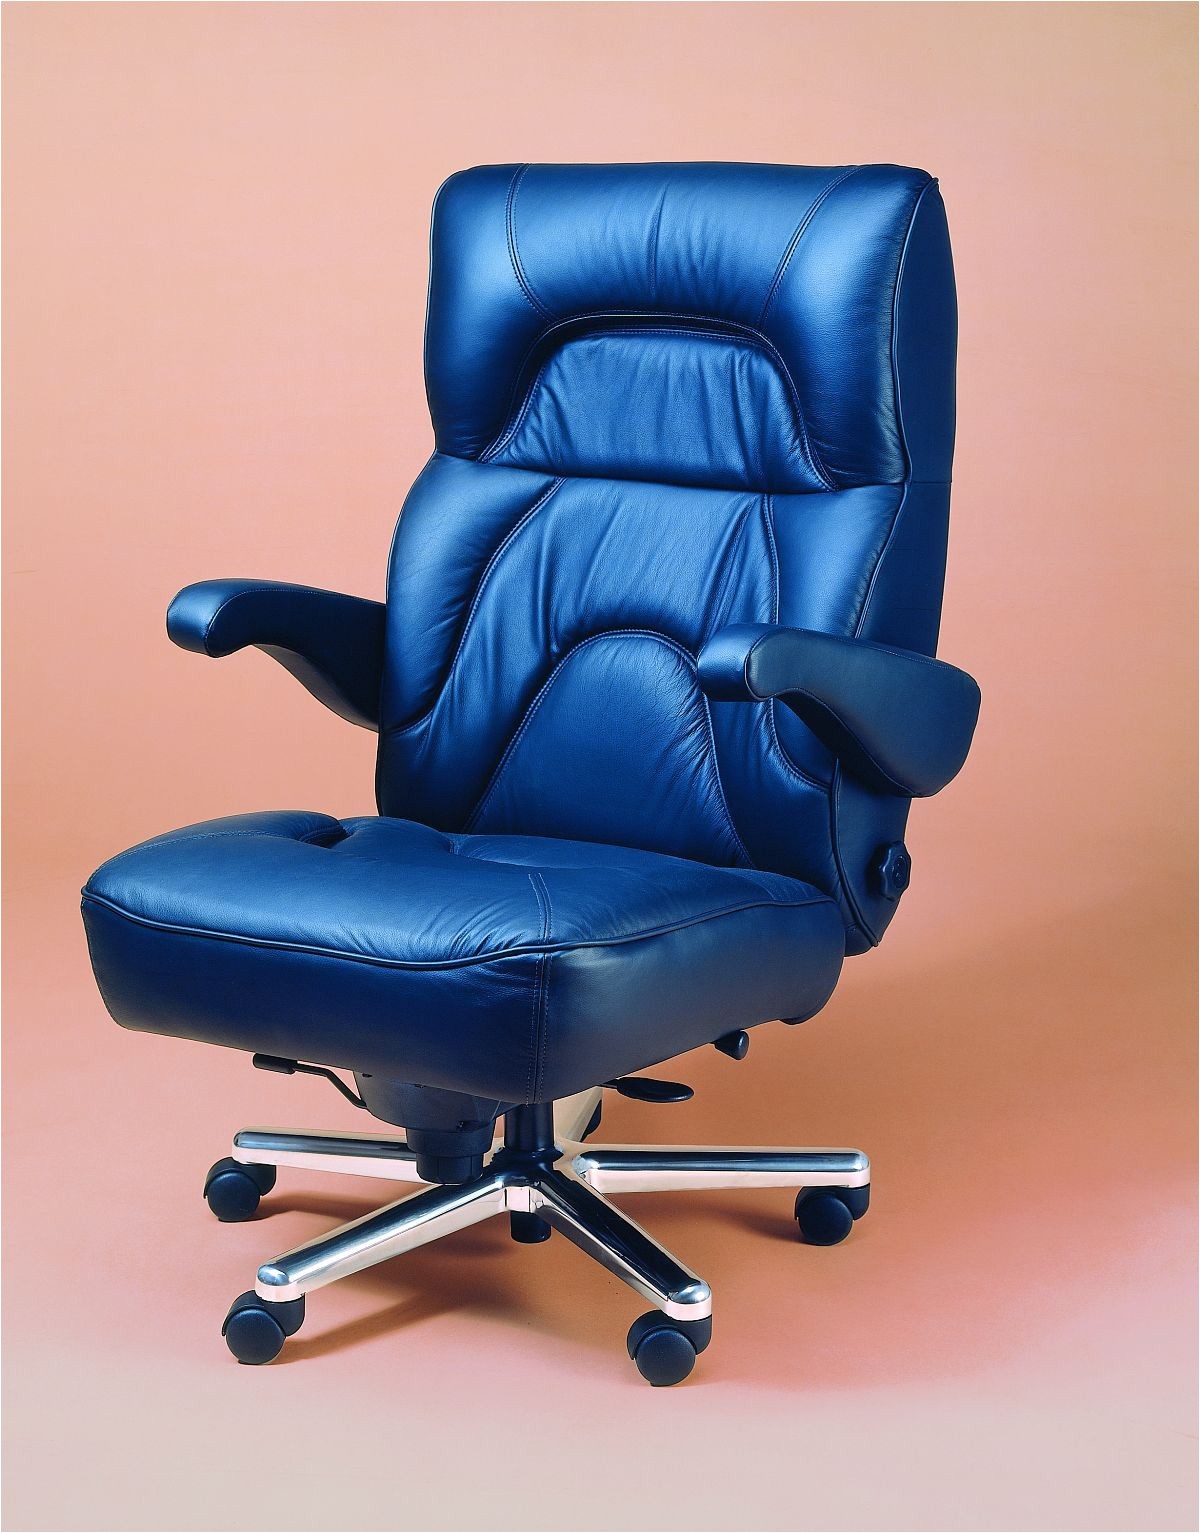 era products chairman office chair with 500 lbs capacity